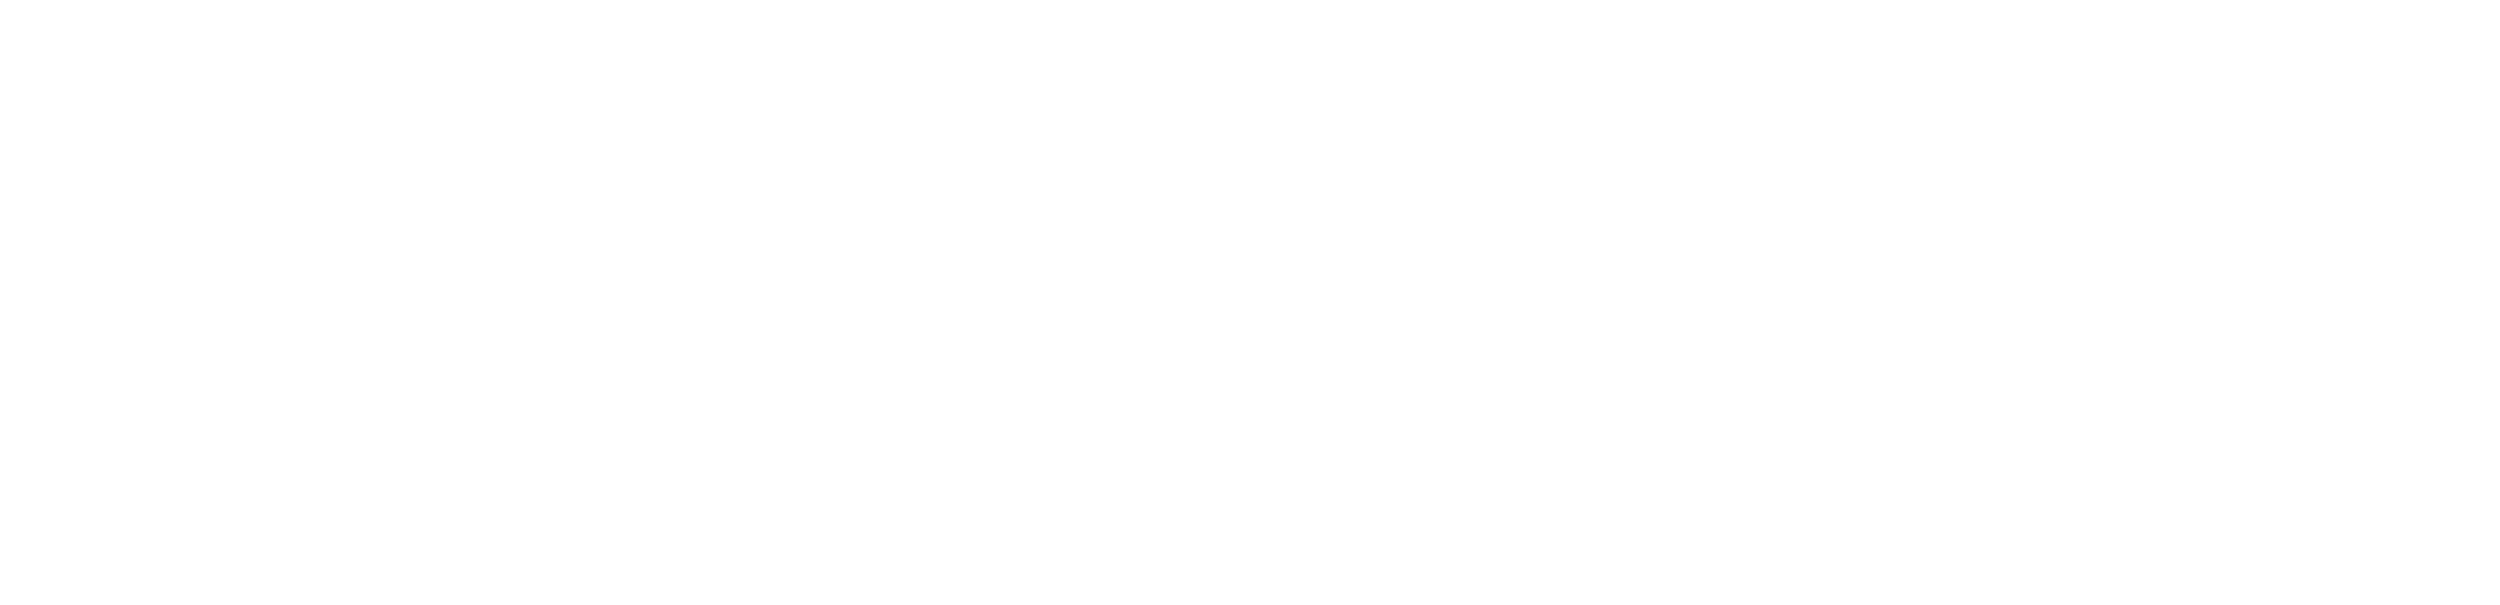 english_chamber_orchestra.png